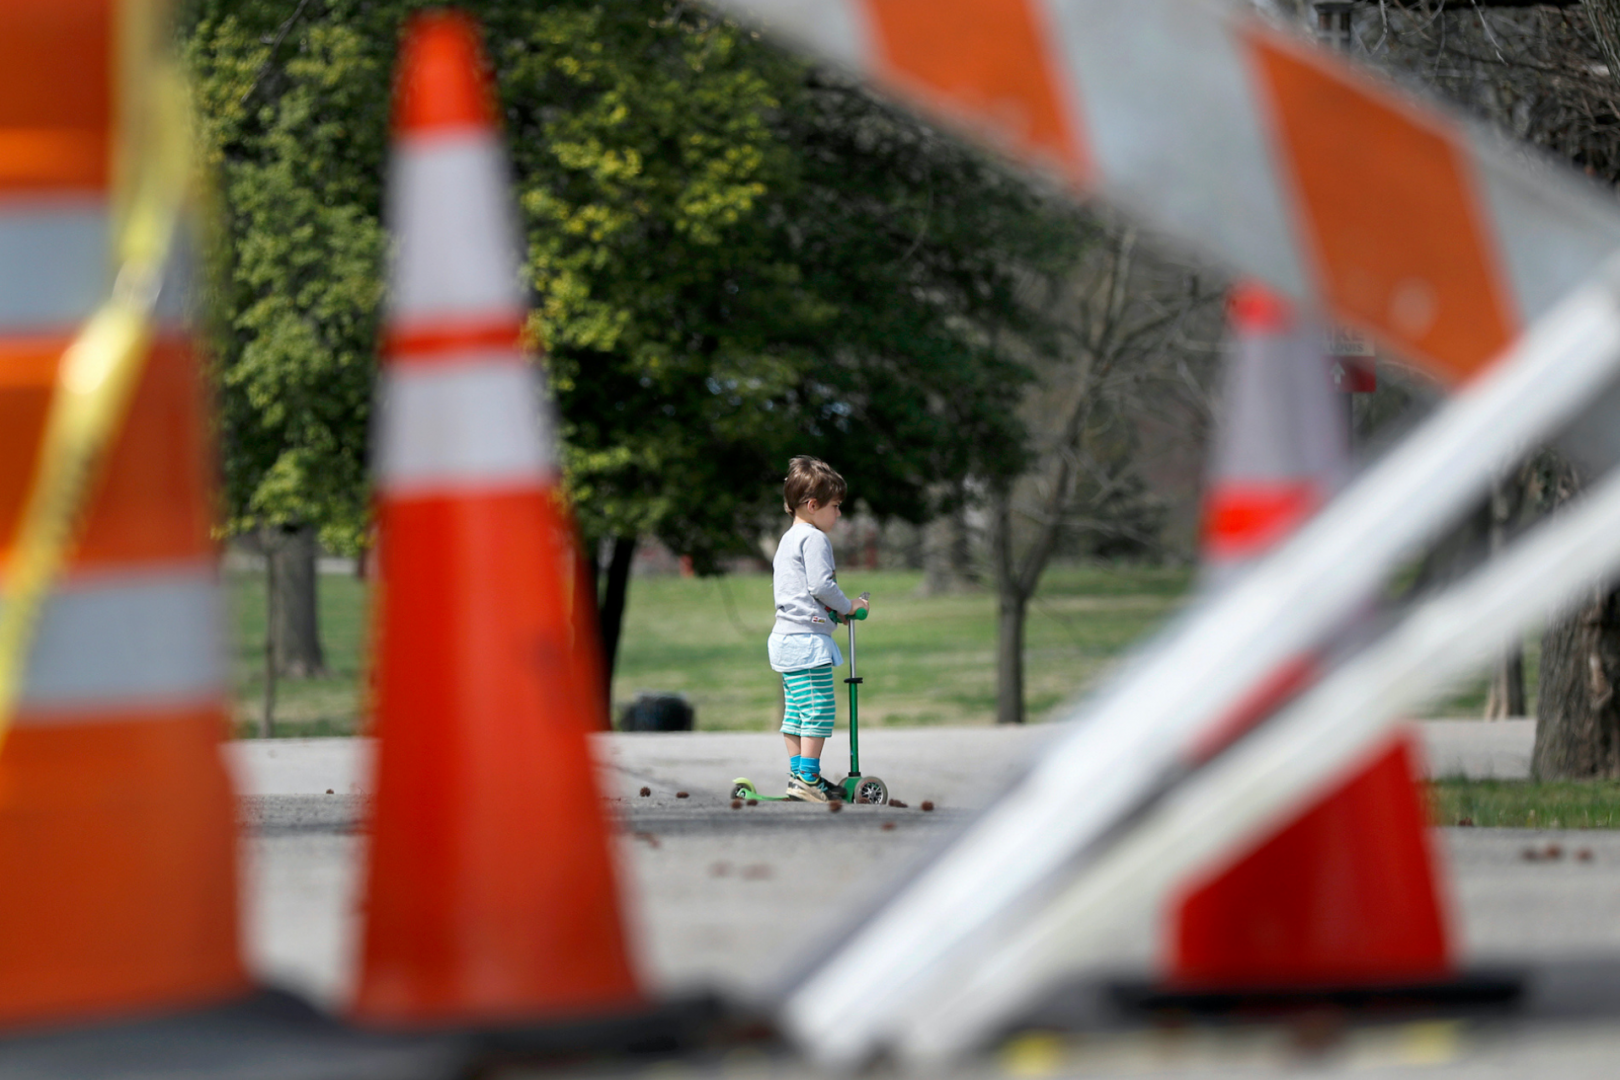 In this March 31, 2020 file photo, a child rides a scooter past barricades at an entrance to Tower Grove Park in St. Louis. 